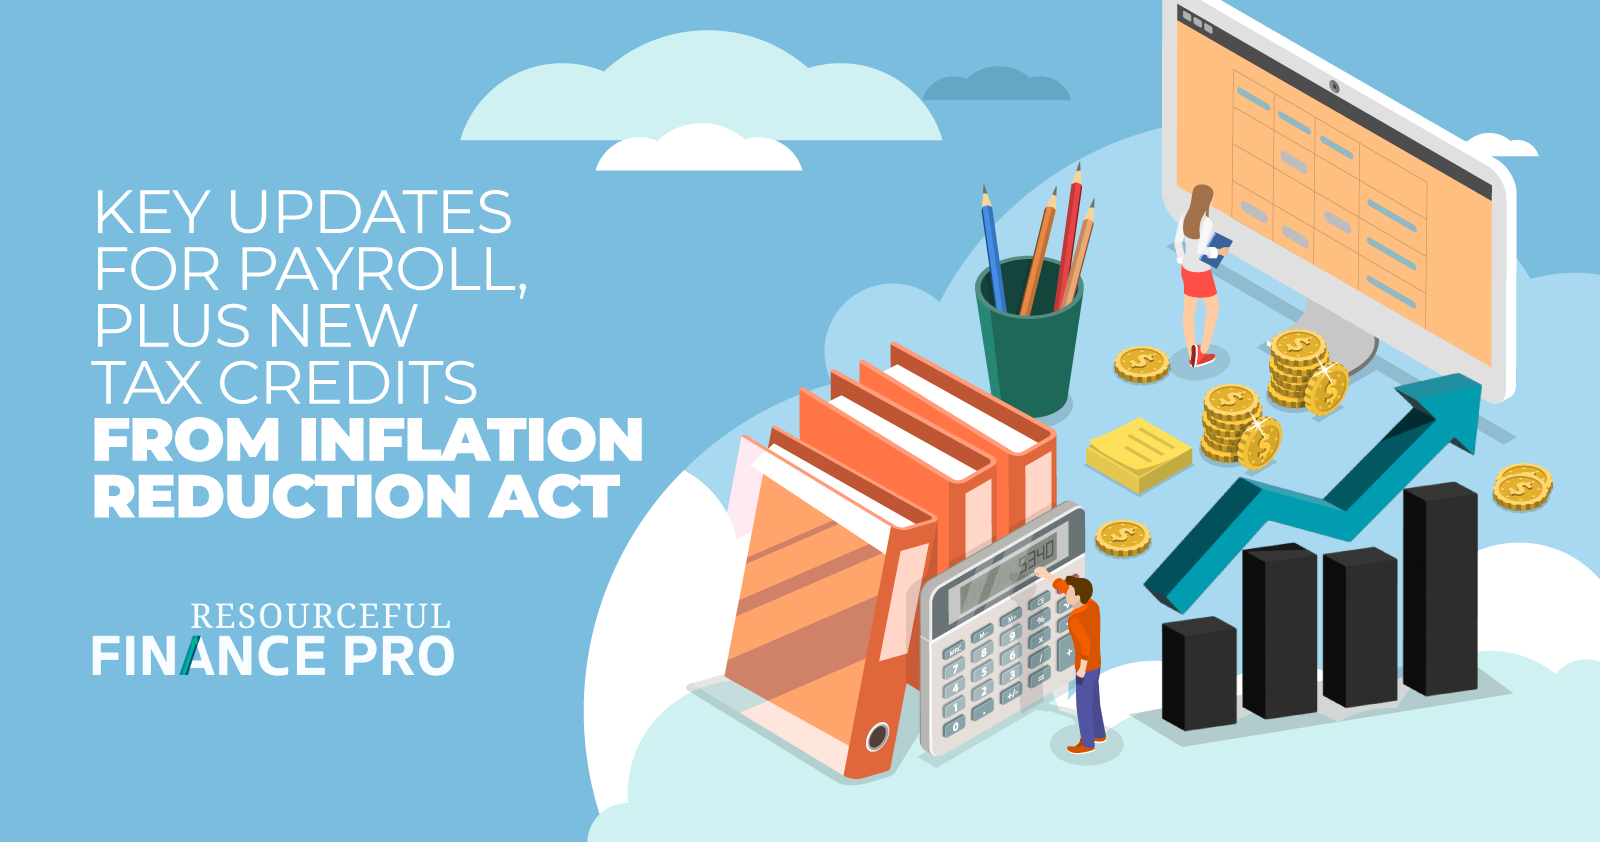 Key Updates For Payroll Plus NewT ax Credits From Inflation Reduction Act